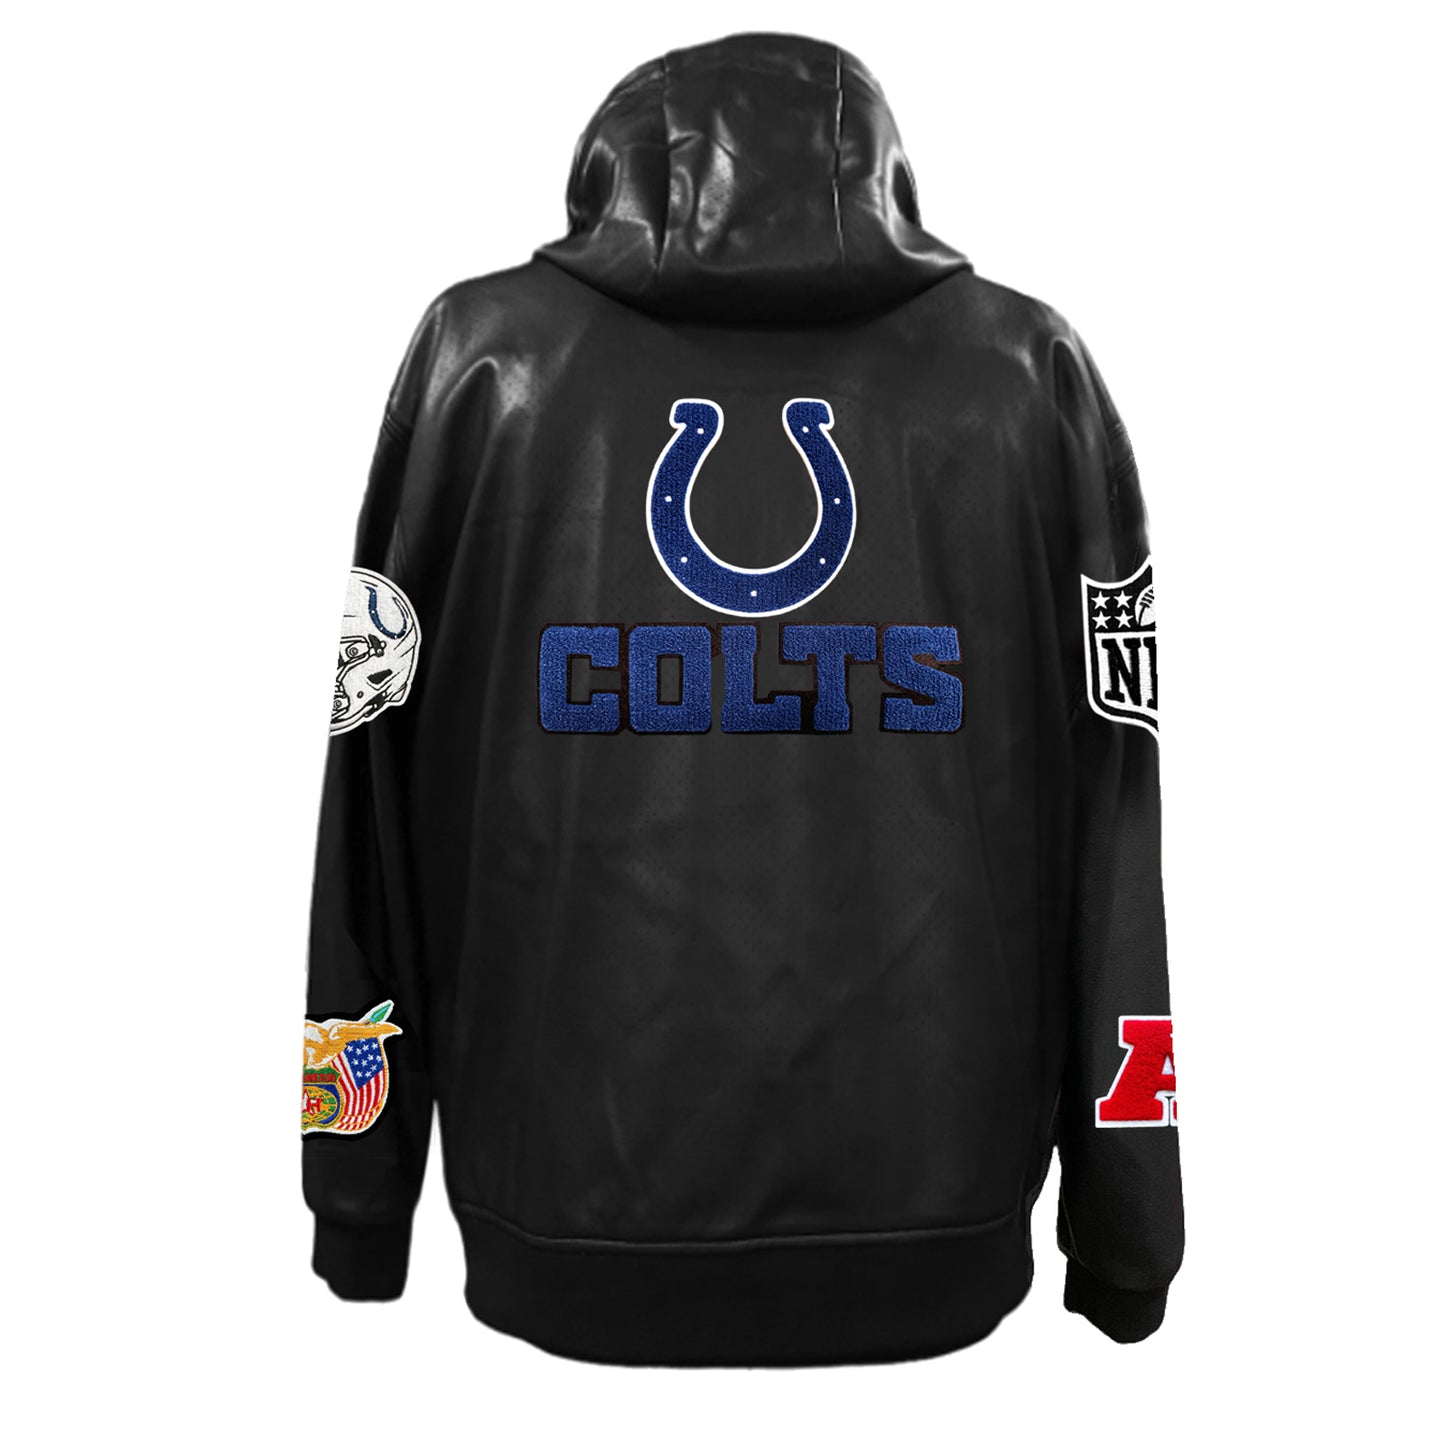 INDIANAPOLIS COLTS LIGHTWEIGHT VEGAN ZIP-UP HOODED JACKET